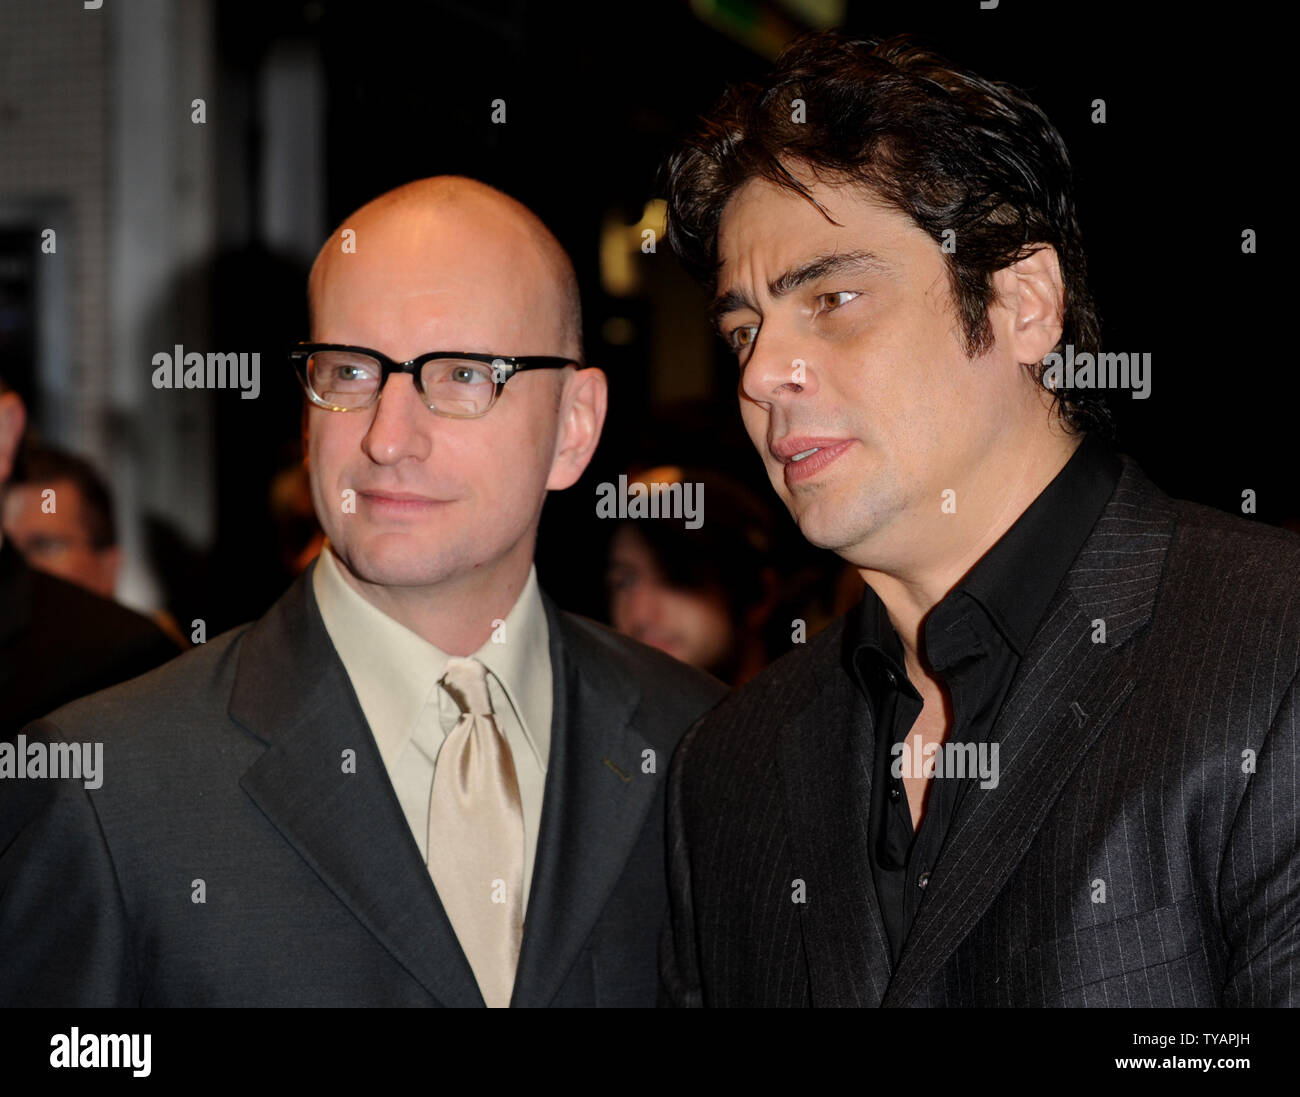 American actor Benicio Del Toro and director Stephen Soderbergh attend the premiere of 'Che' at The Times BFI London Film Festival at Odeon West End, Leicester Square in London on October 25, 2008.  (UPI Photo/Rune Hellestad) Stock Photo